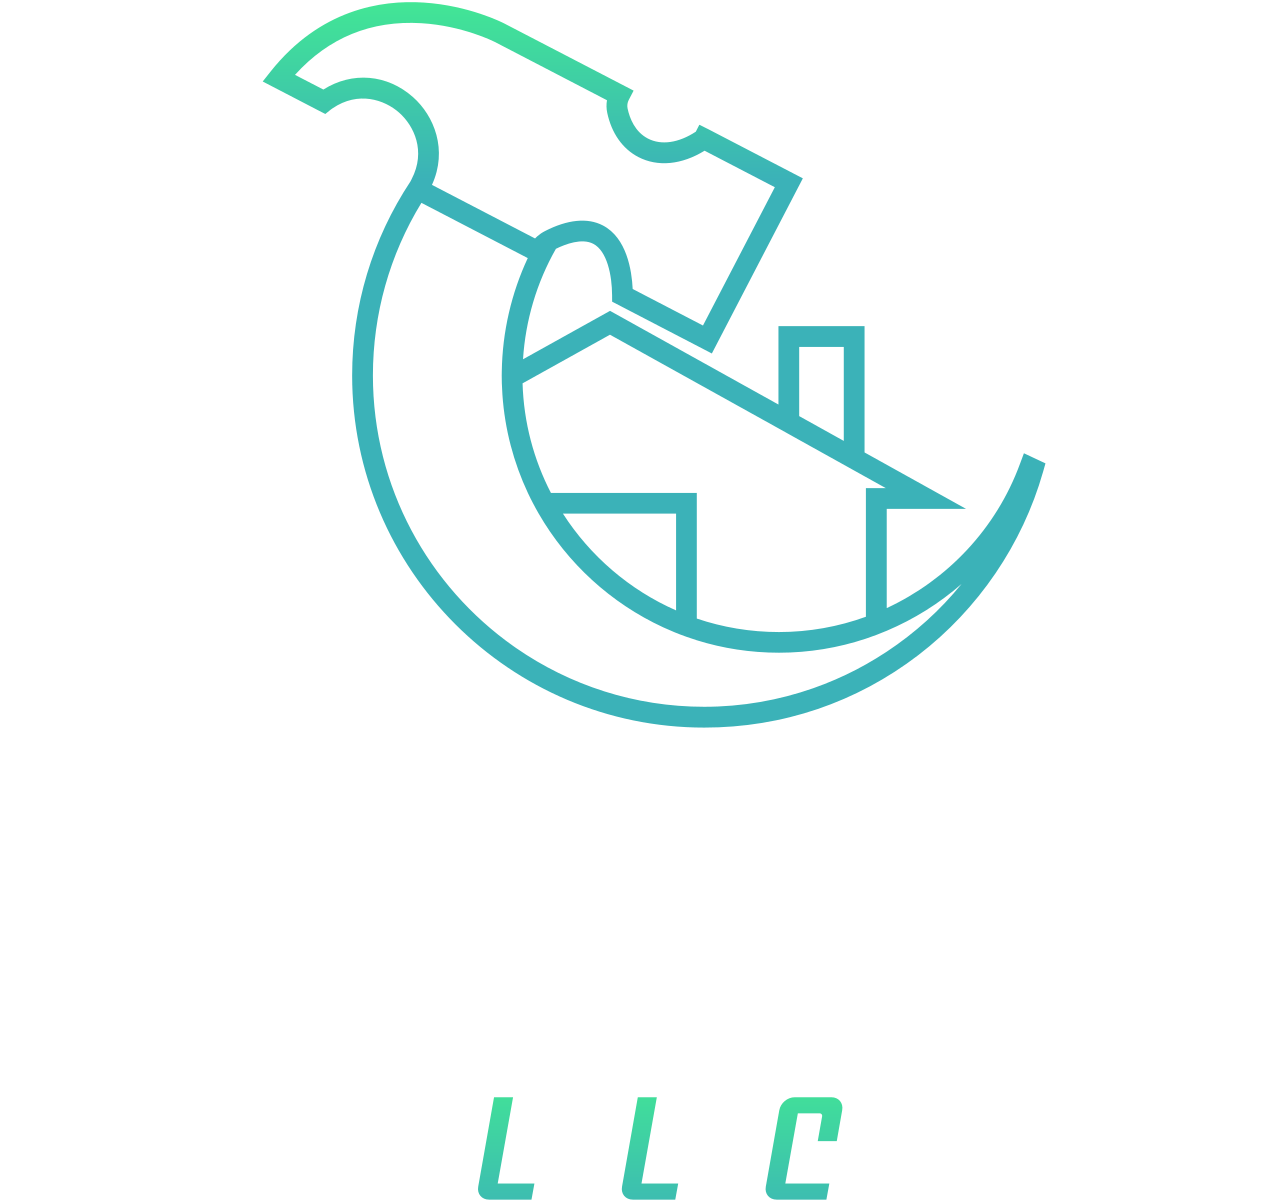 Level Up Builders 's web page